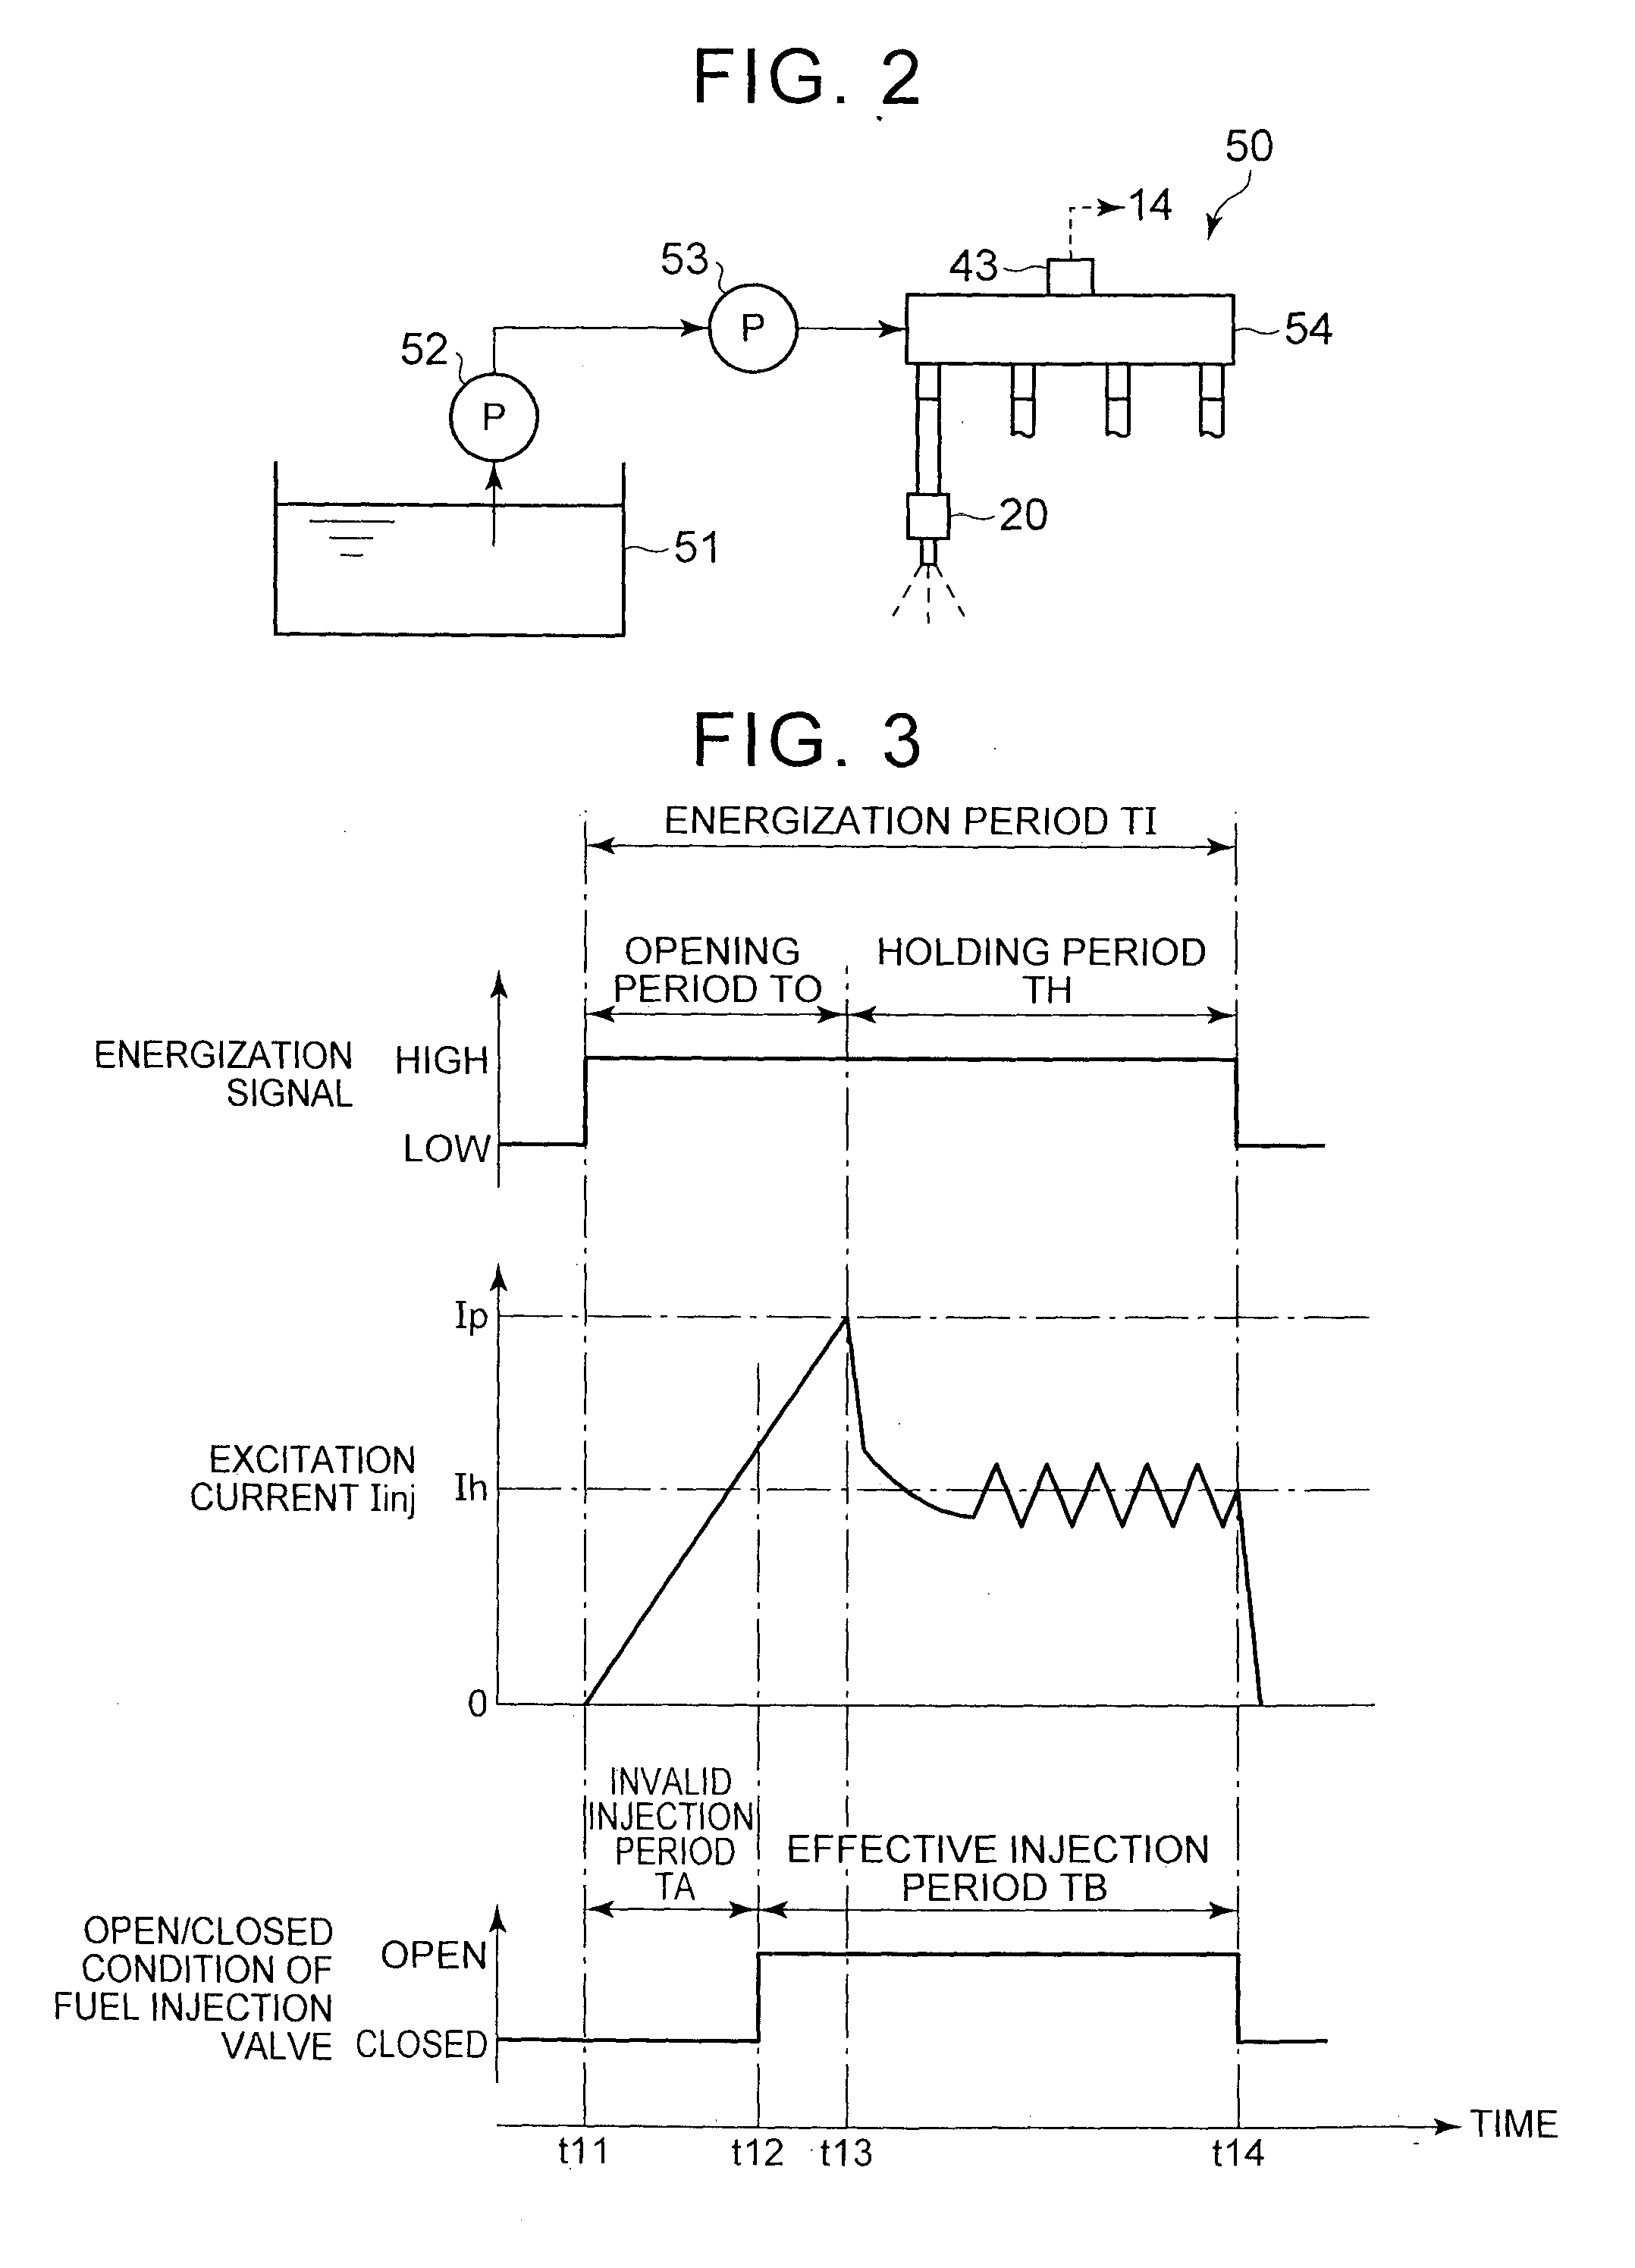 Control apparatus for fuel injection valve and mehod thereof